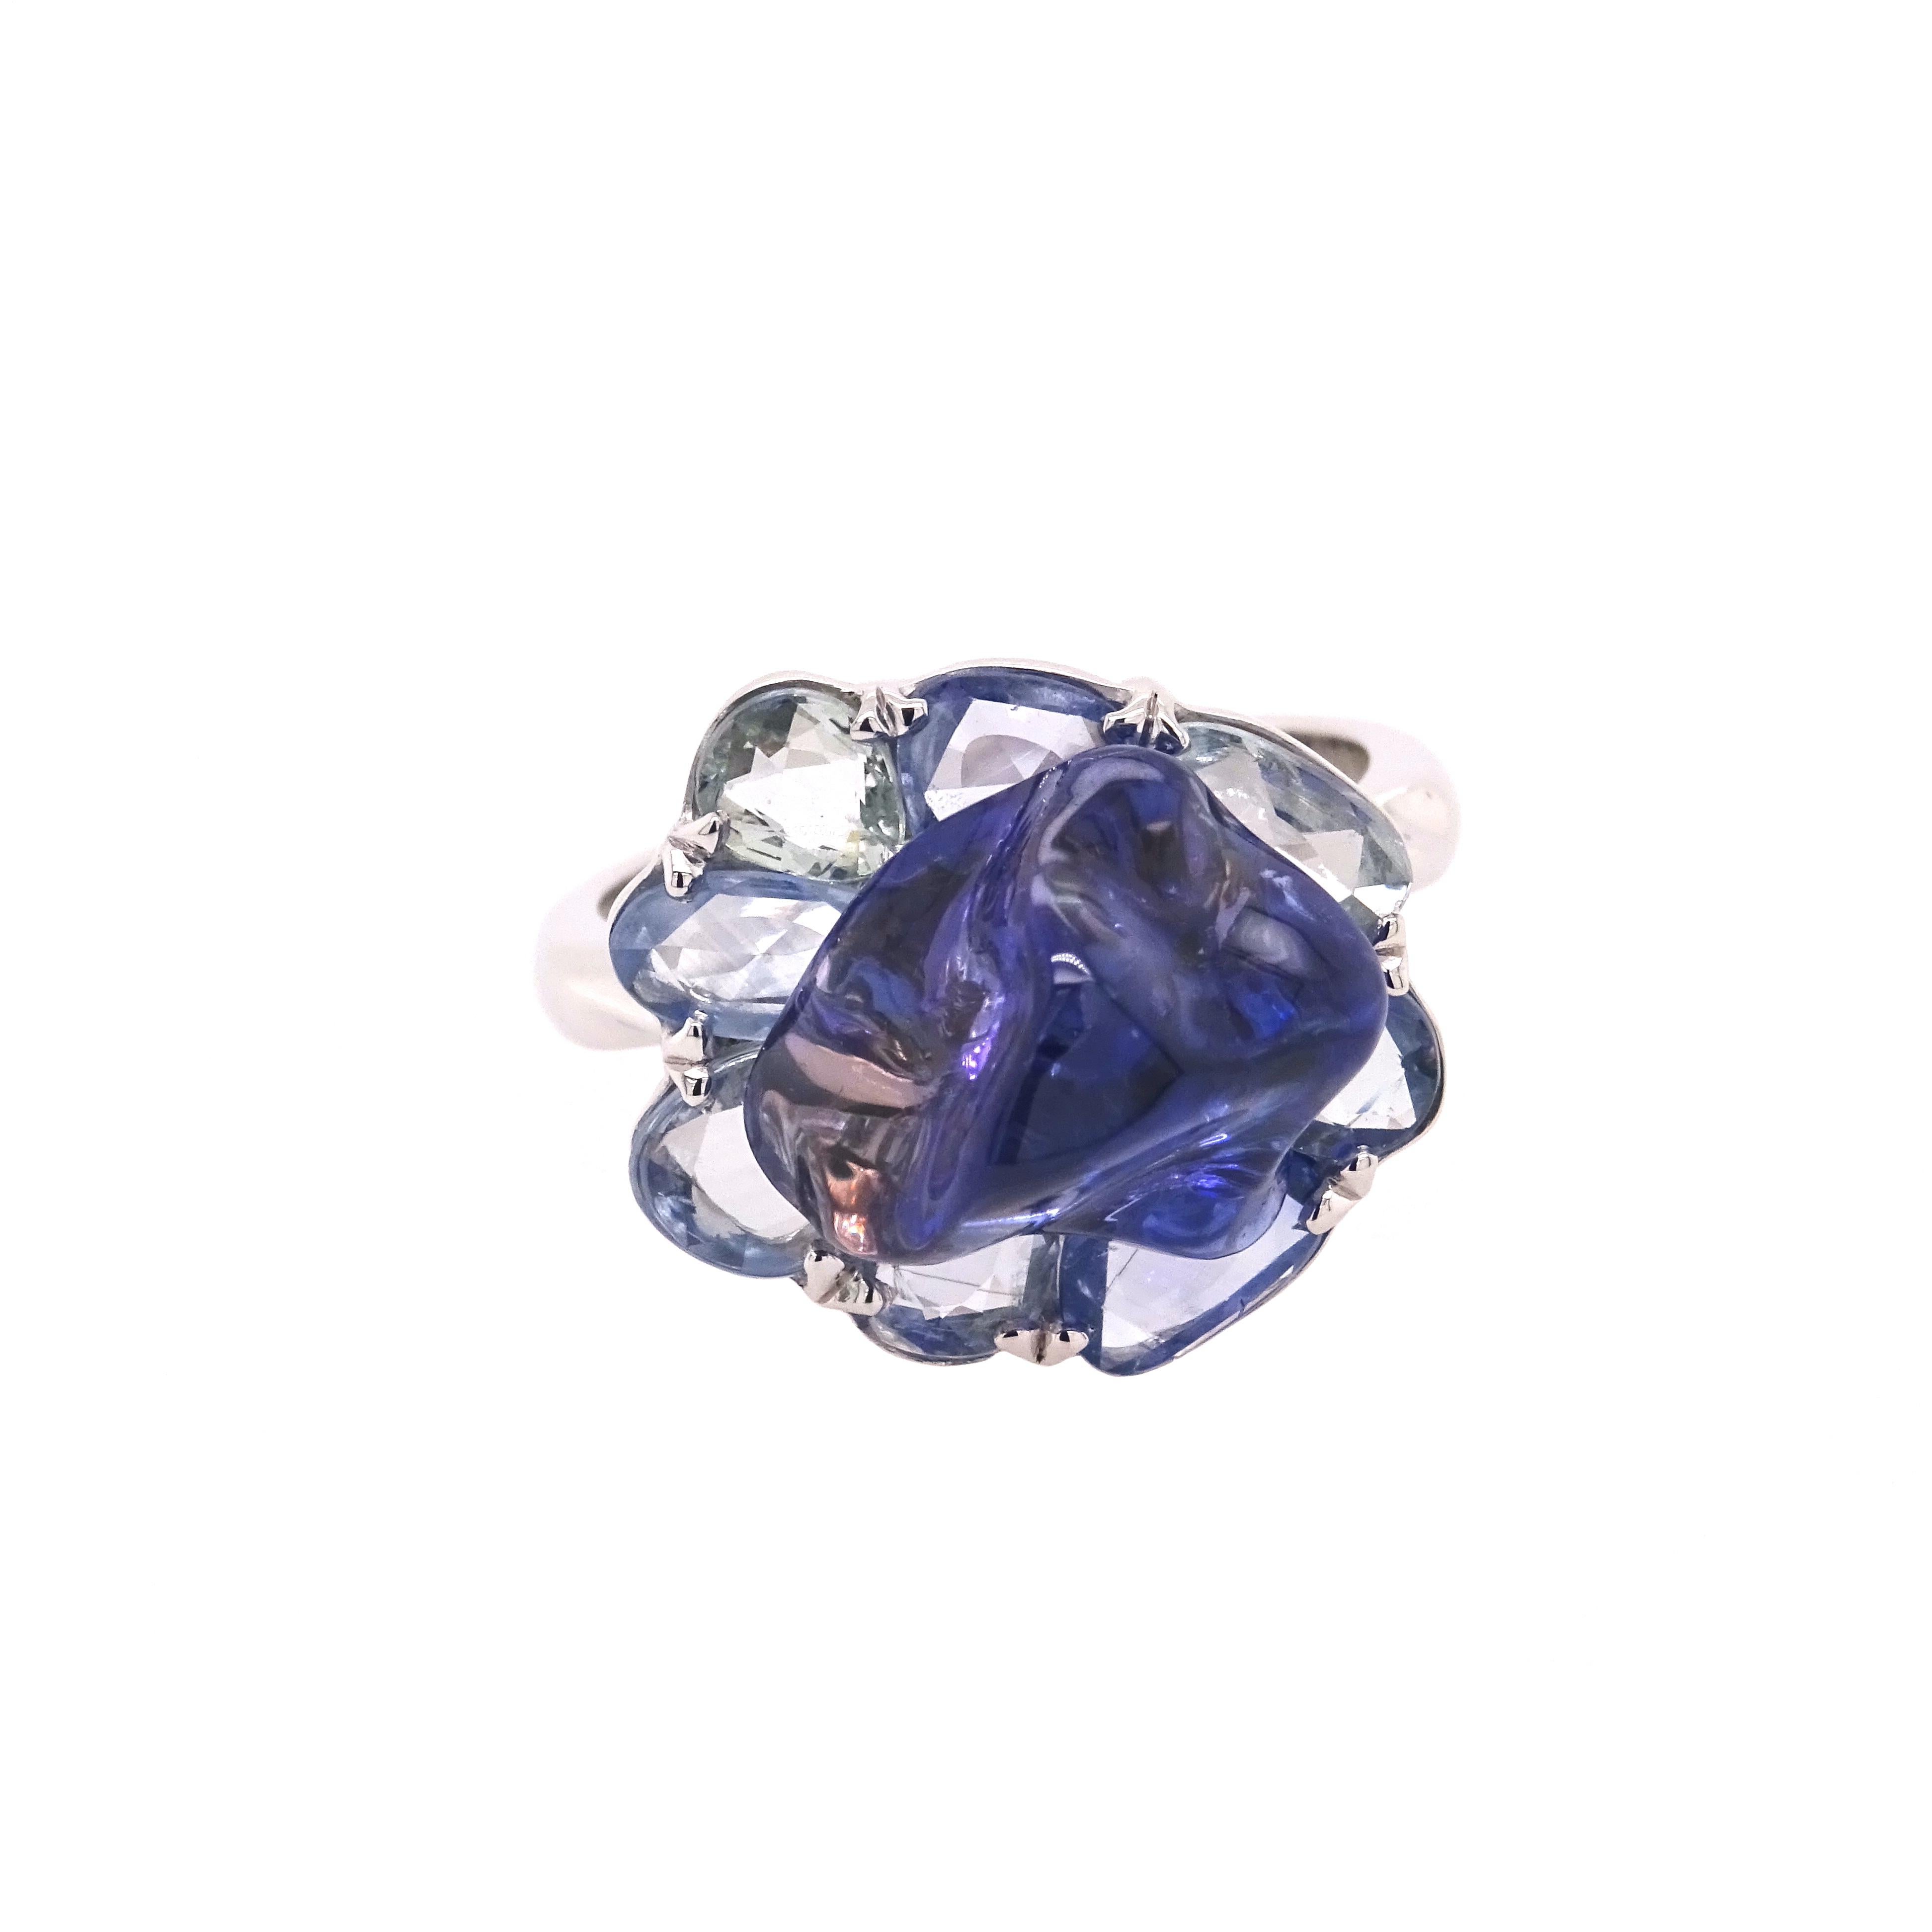 Organic Collection by VOTIVE.

Introducing VOTIVE's Organic Collection, a stunning showcase of nature's beauty and artistry. Behold this exquisite 18K white gold ring, adorned with a naturally shaped blue sapphire that crowns the petal-inspired